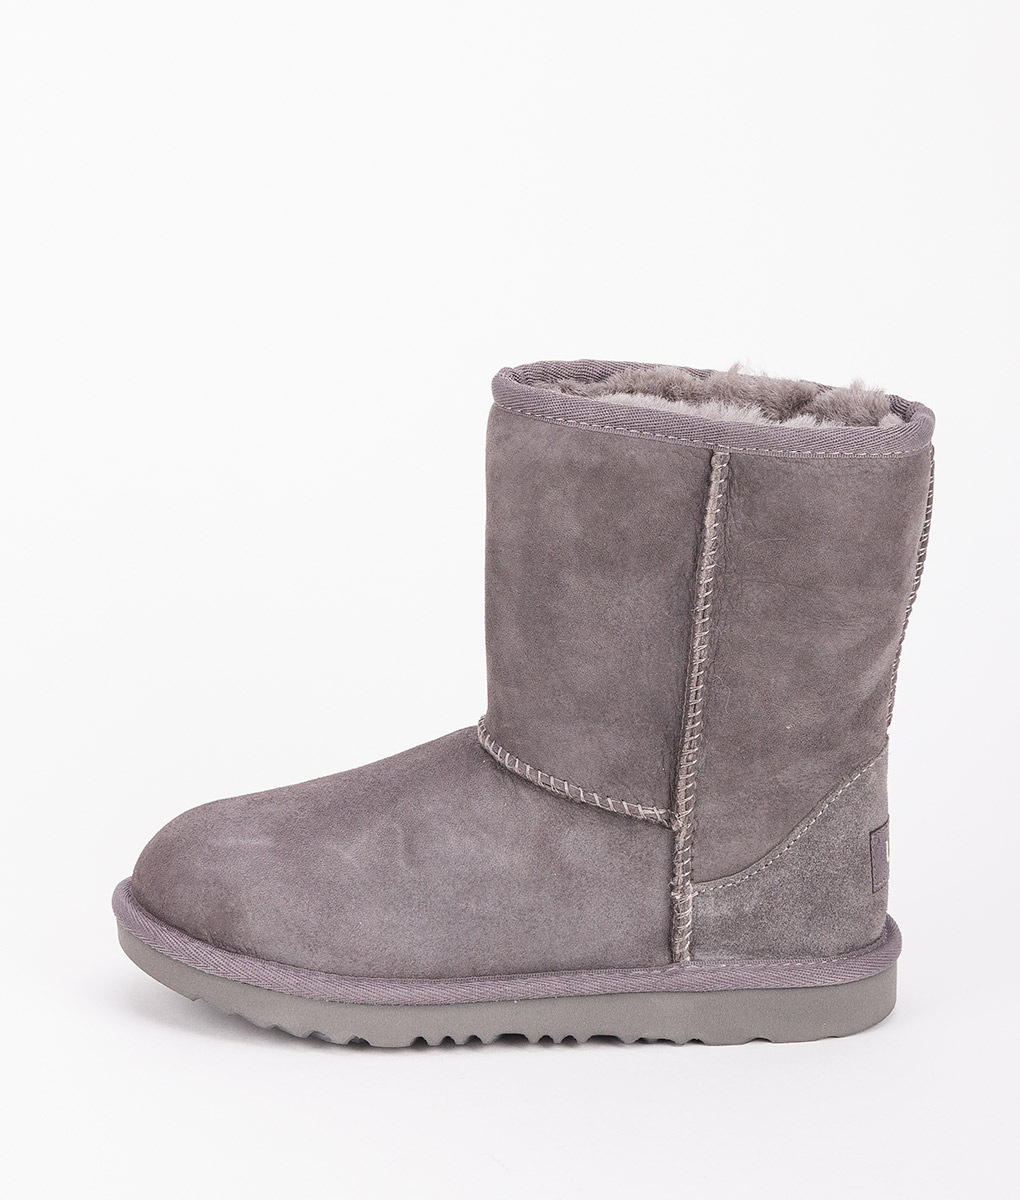 UGG Kids Ankle Boots 1017703K CLASSIC II, Grey